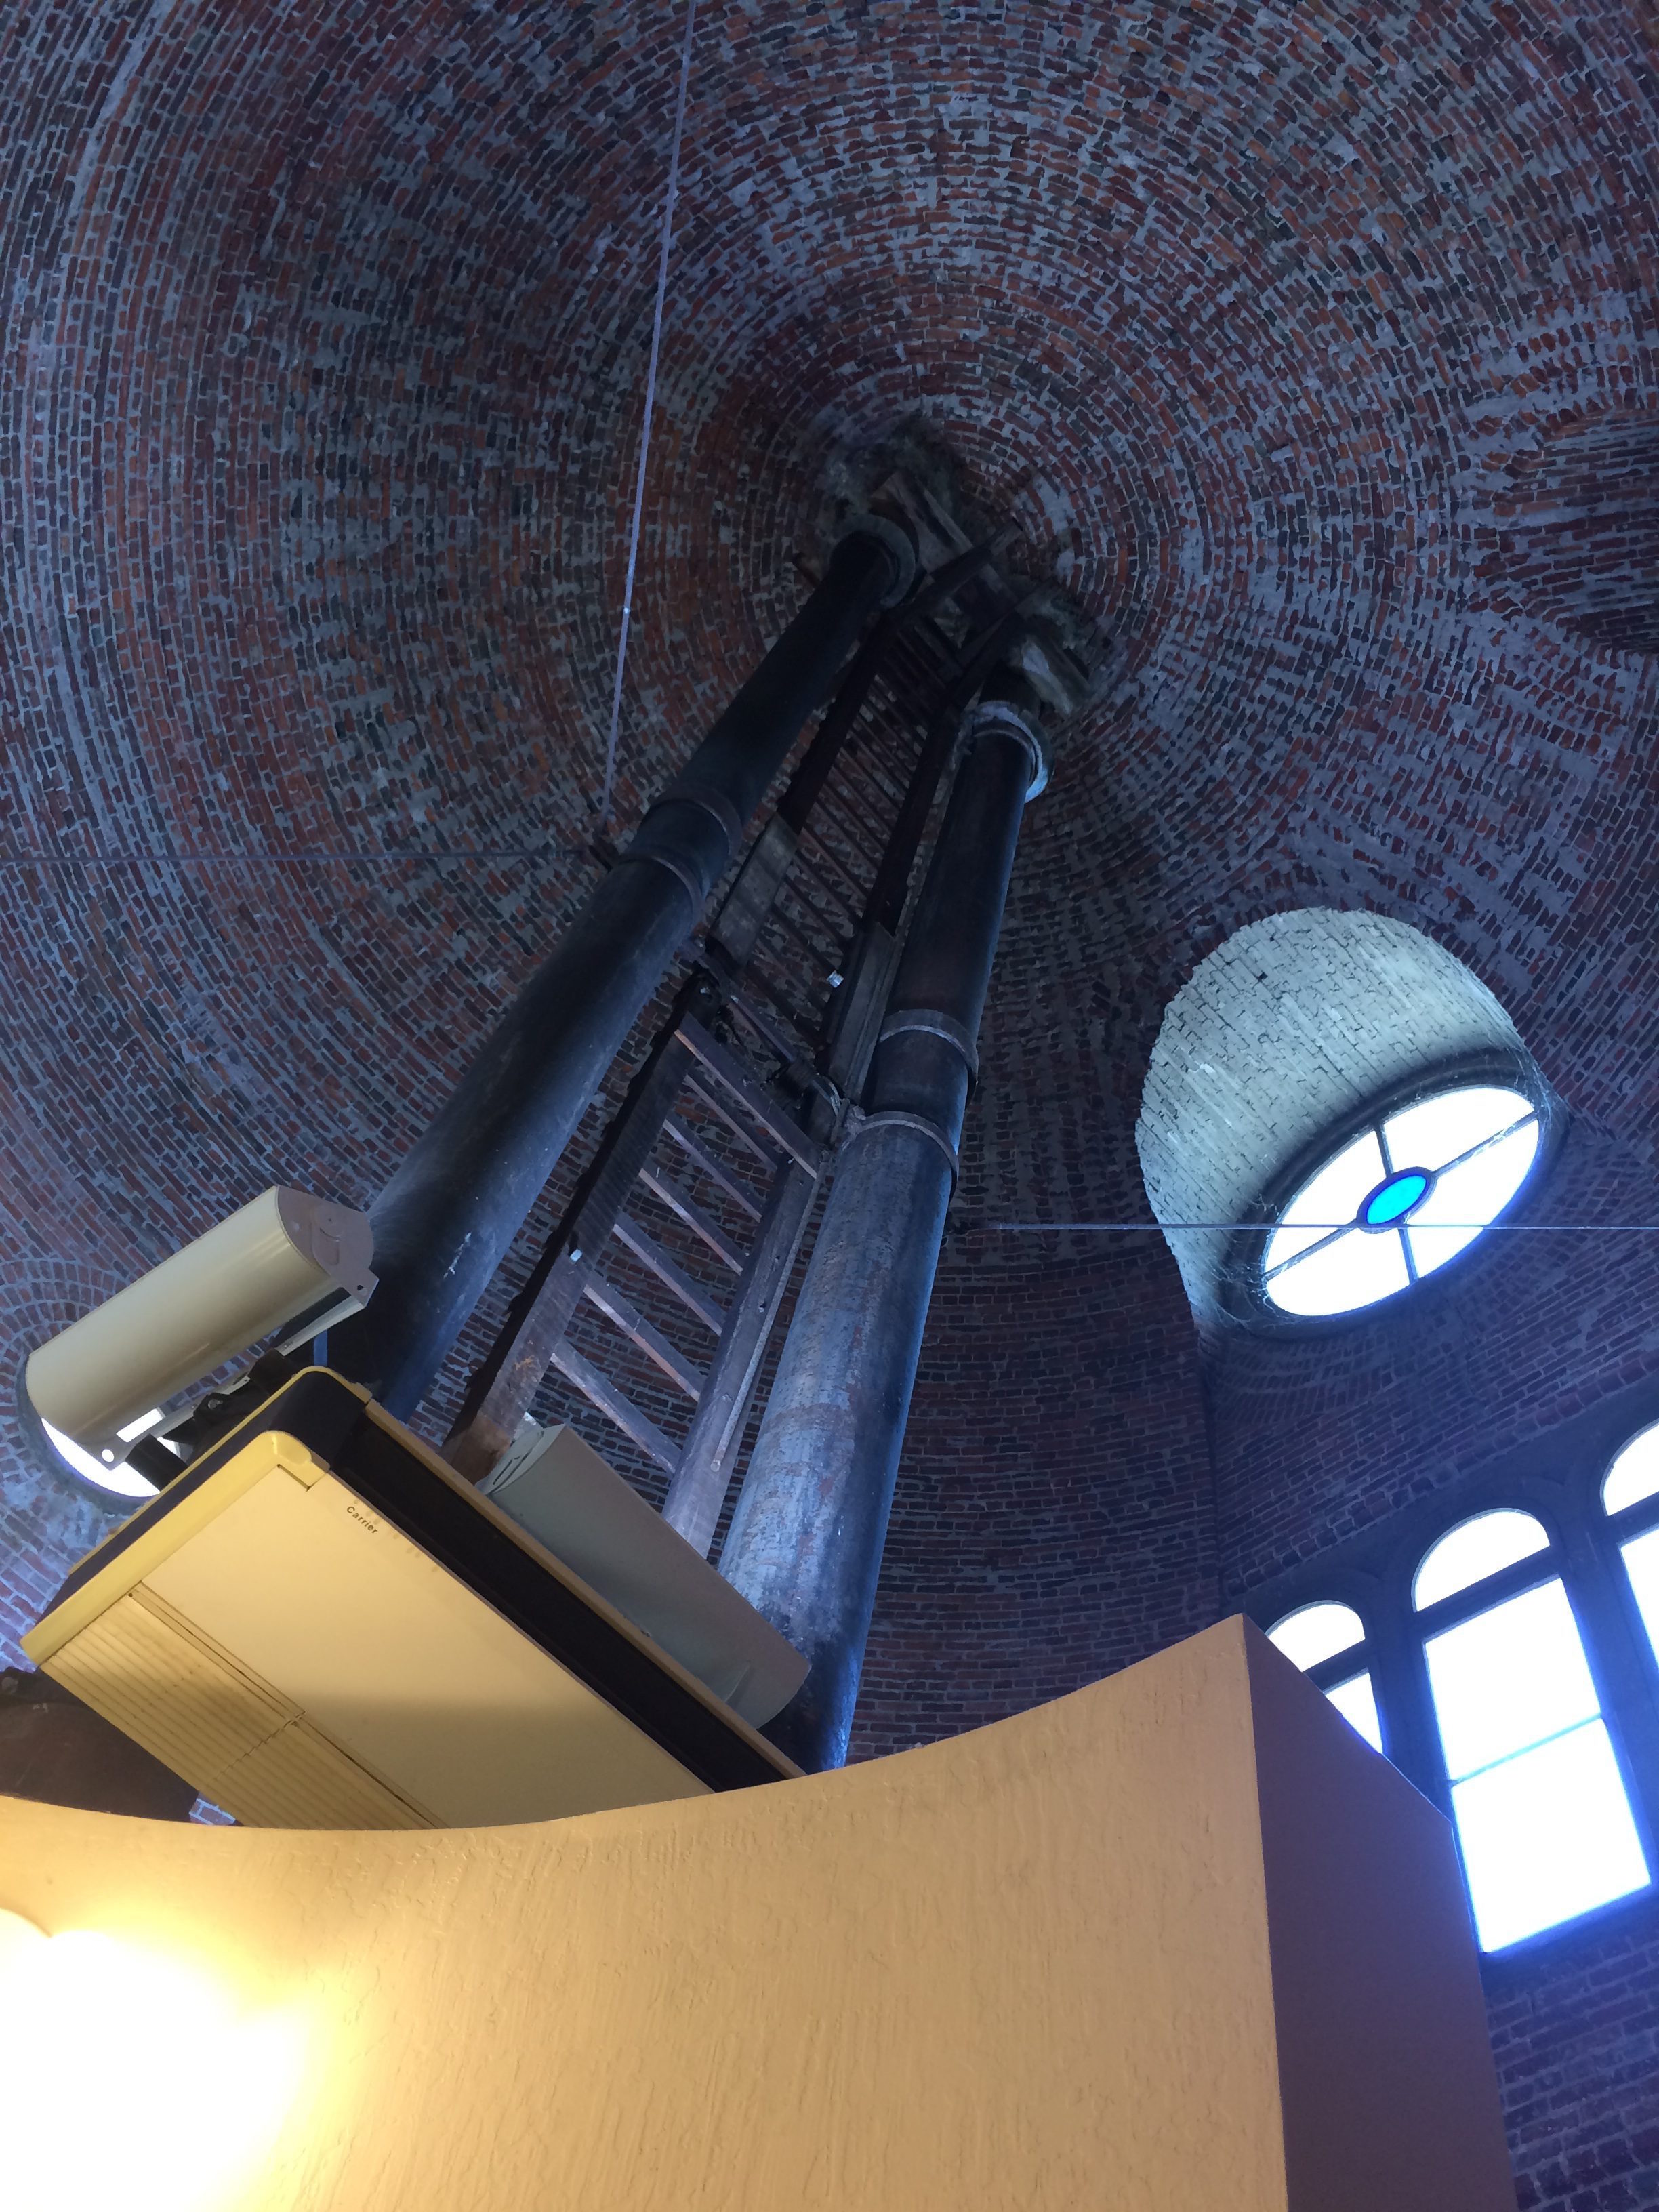 Inside the Water Tower, looking up.